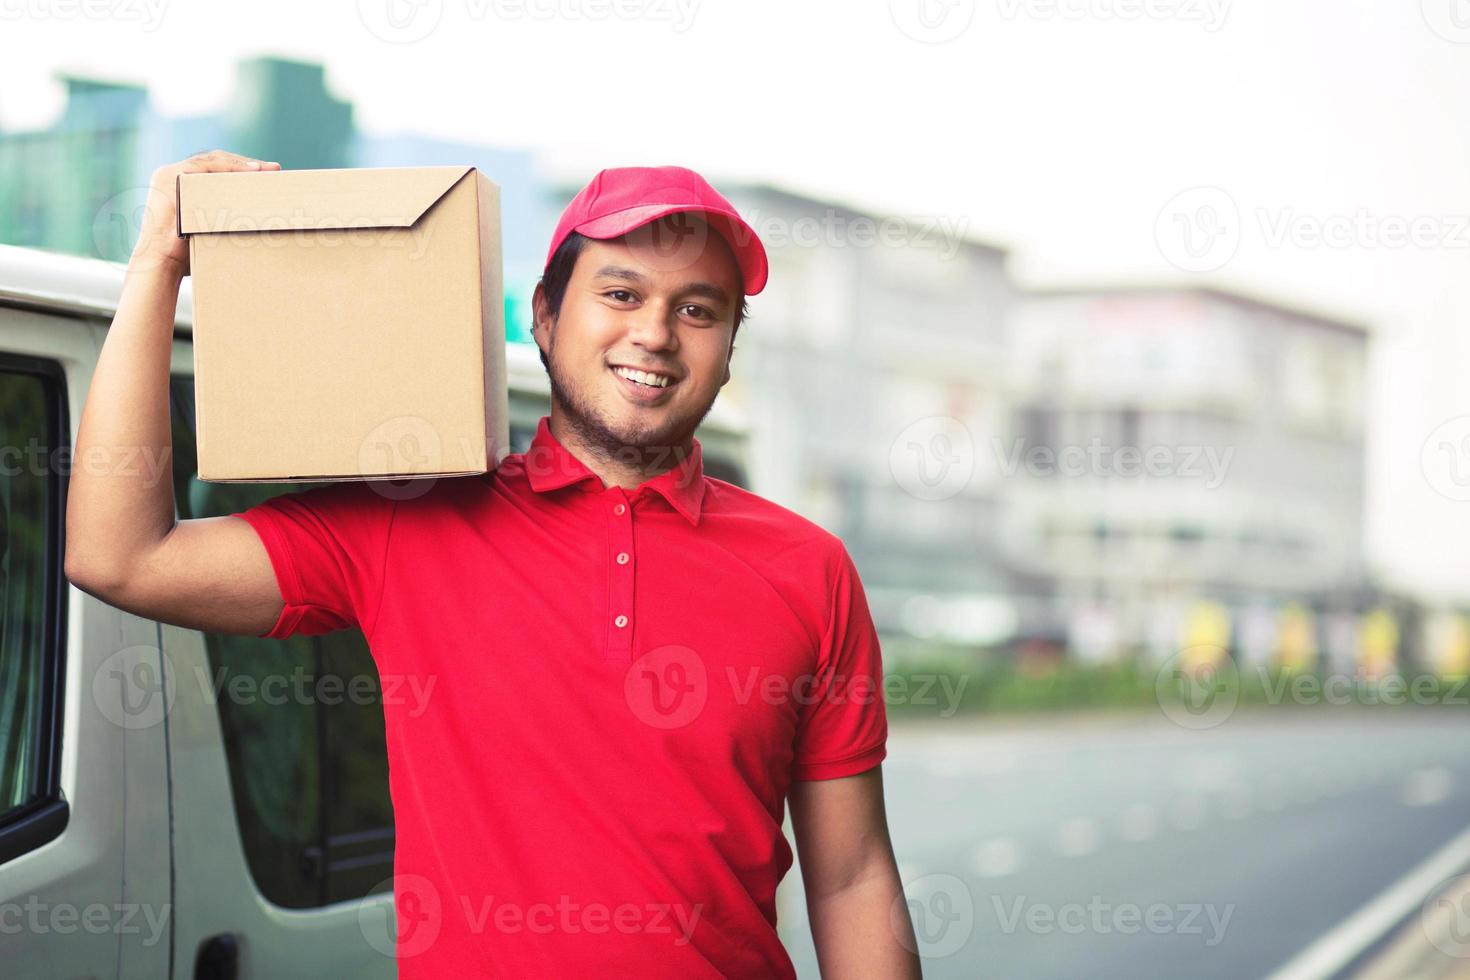 parcel delivery man of a package through a service send to home. consign hand Submission customer accepting a delivery of boxes from delivery man. photo